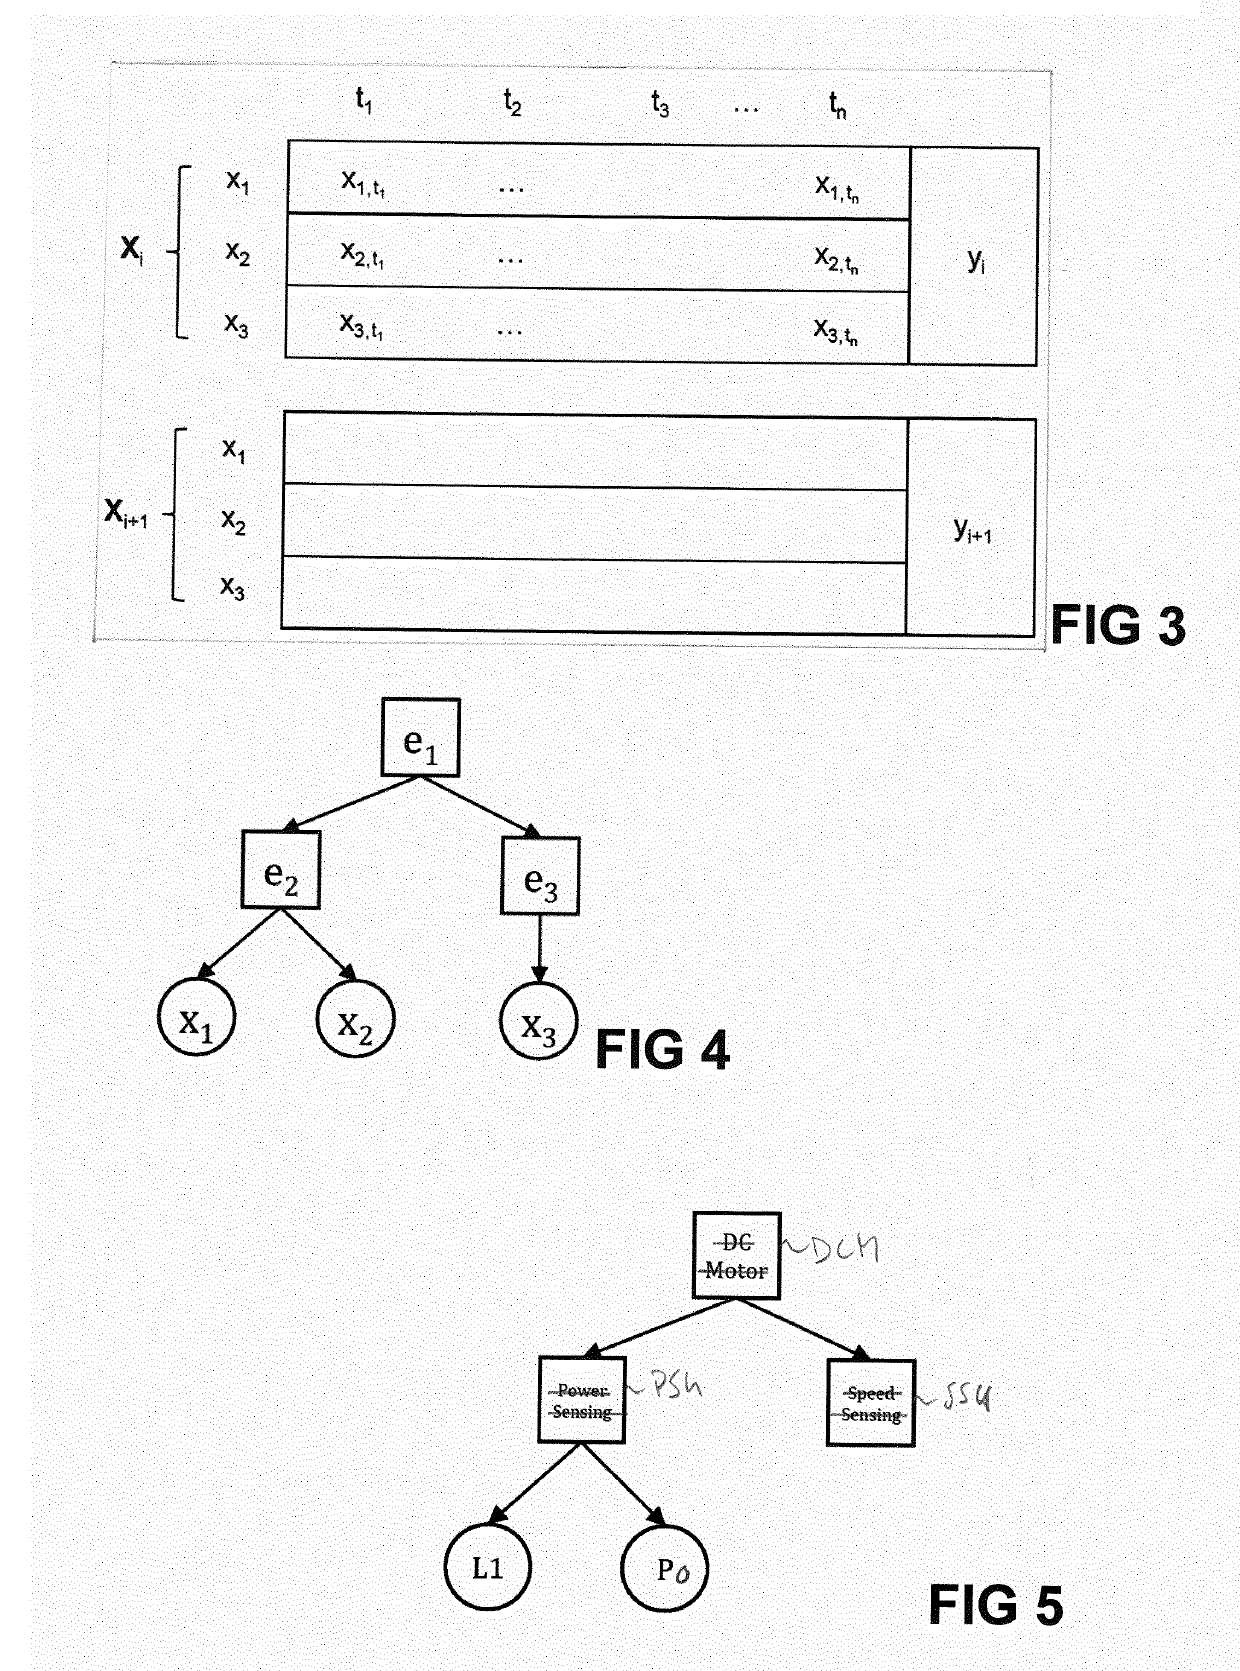 Method and system for anomaly detection in a manufacturing system